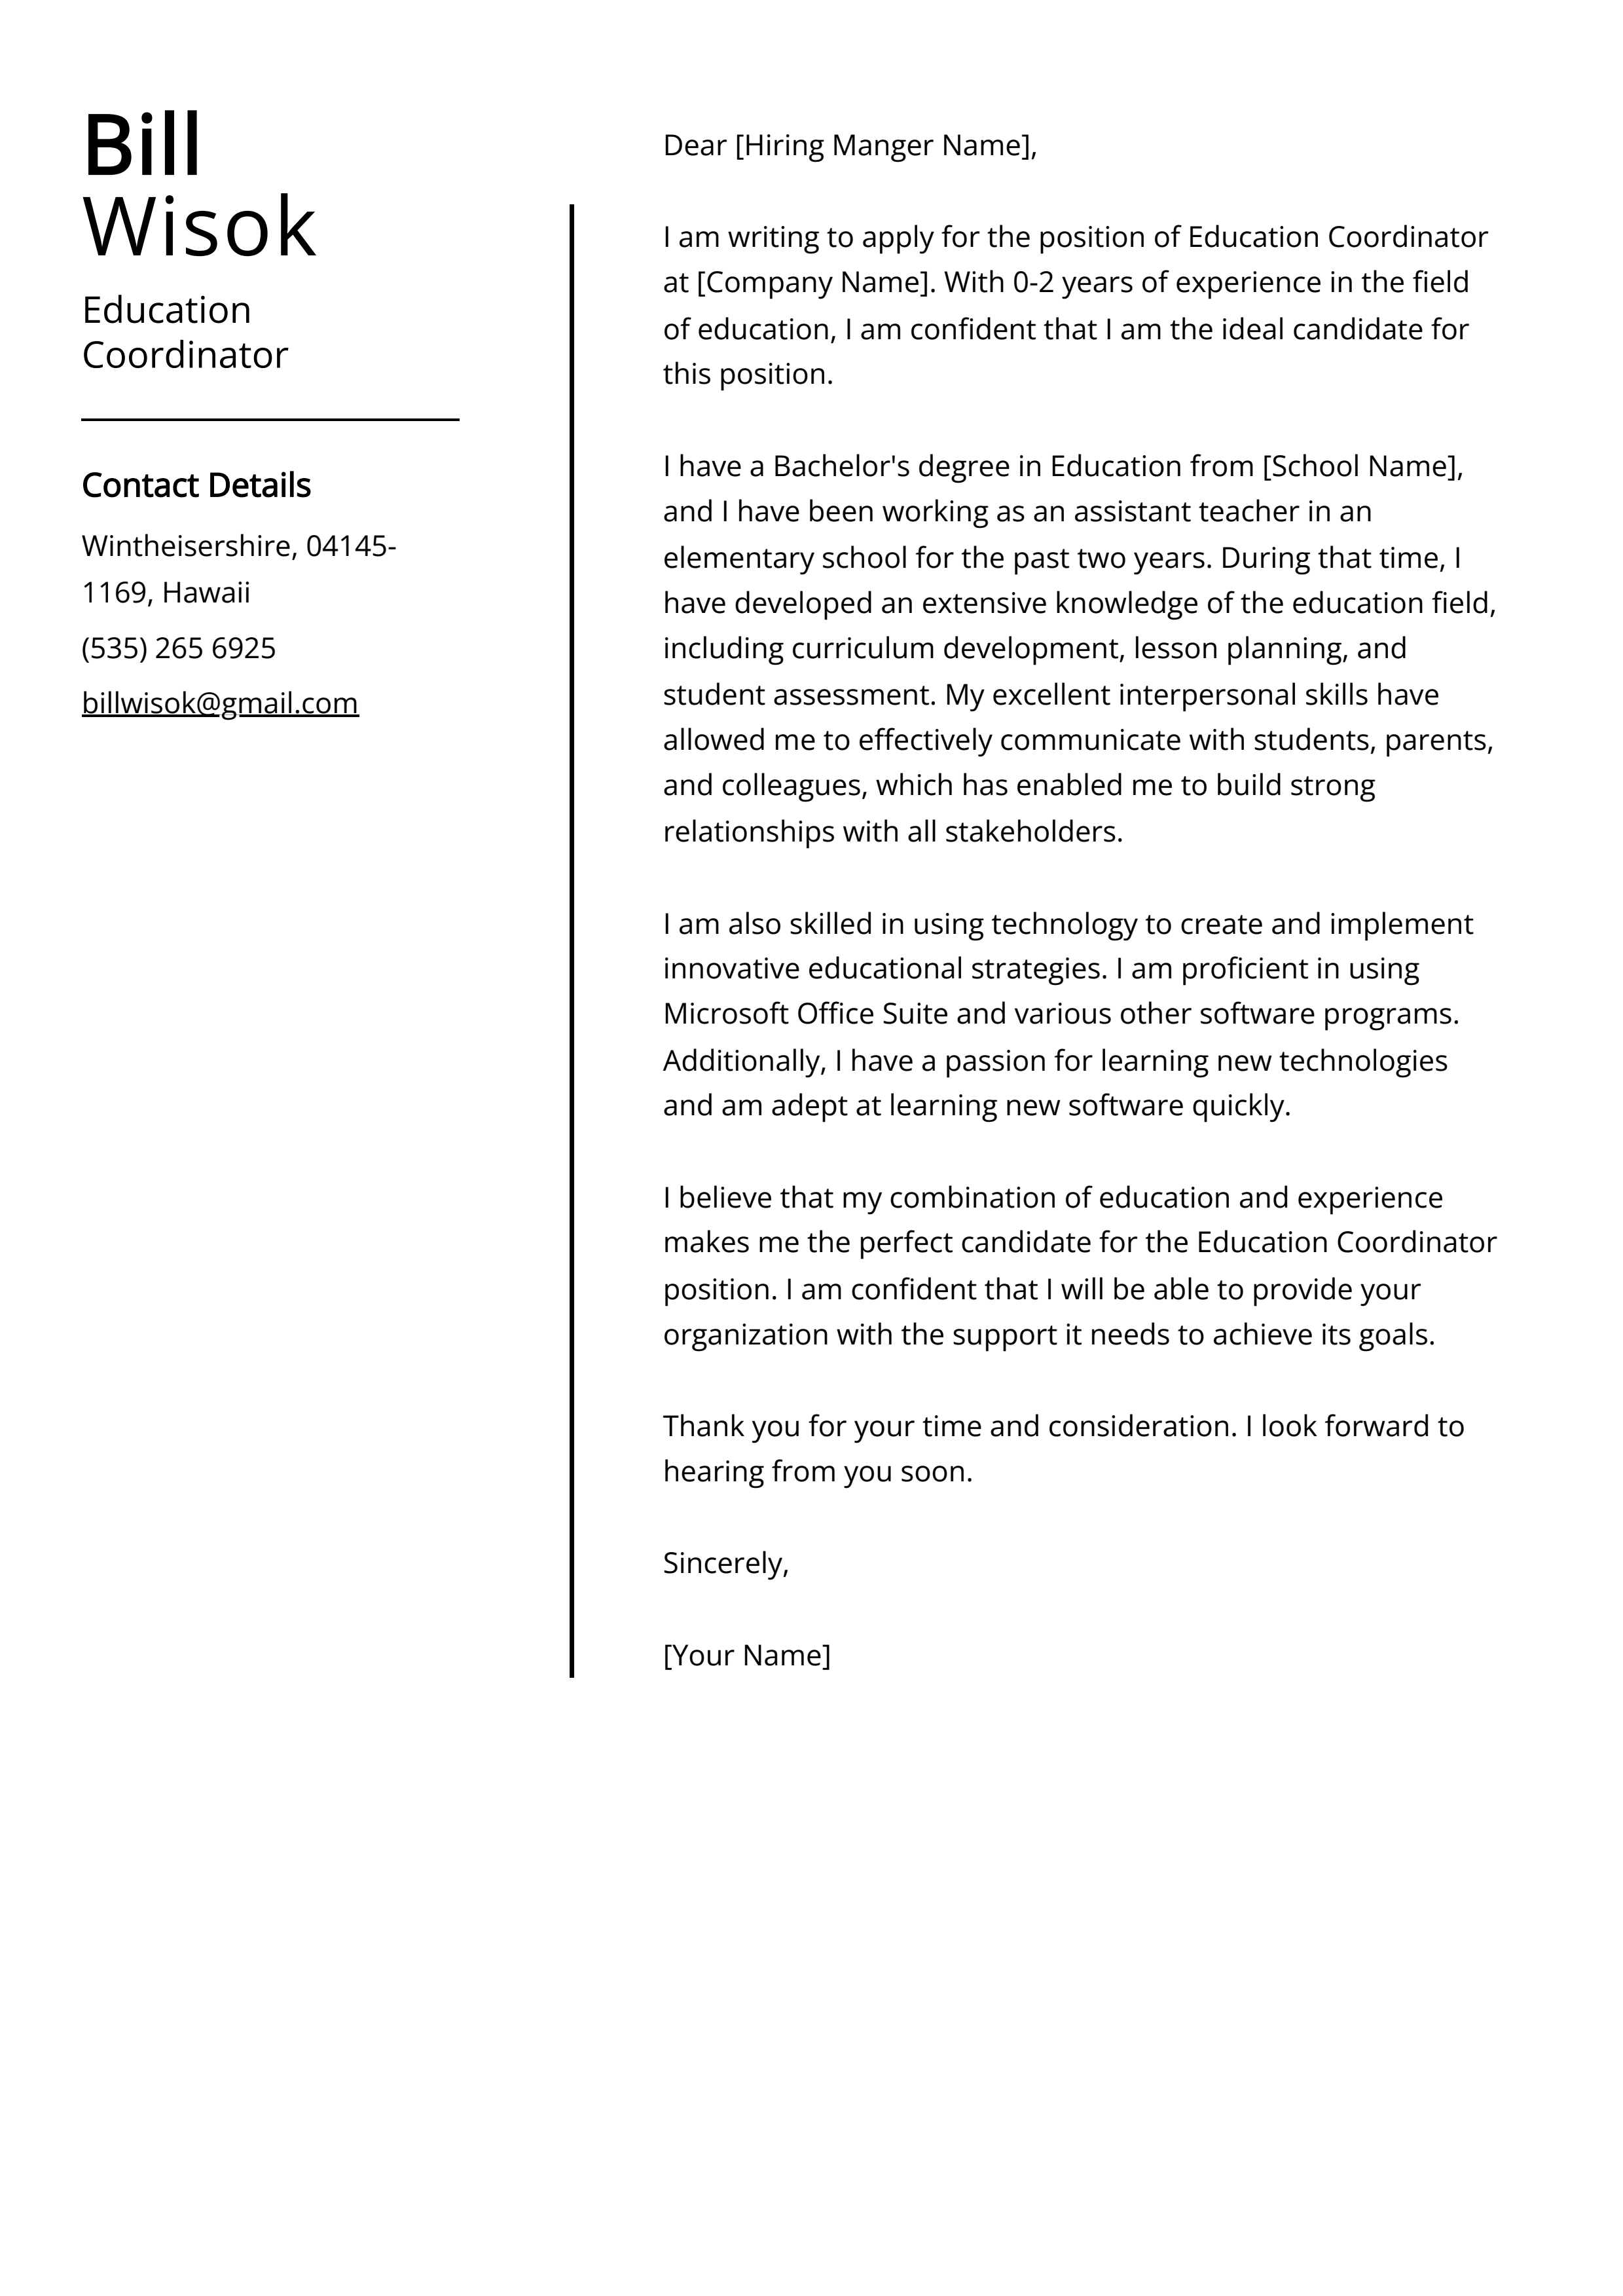 Education Coordinator Cover Letter Example